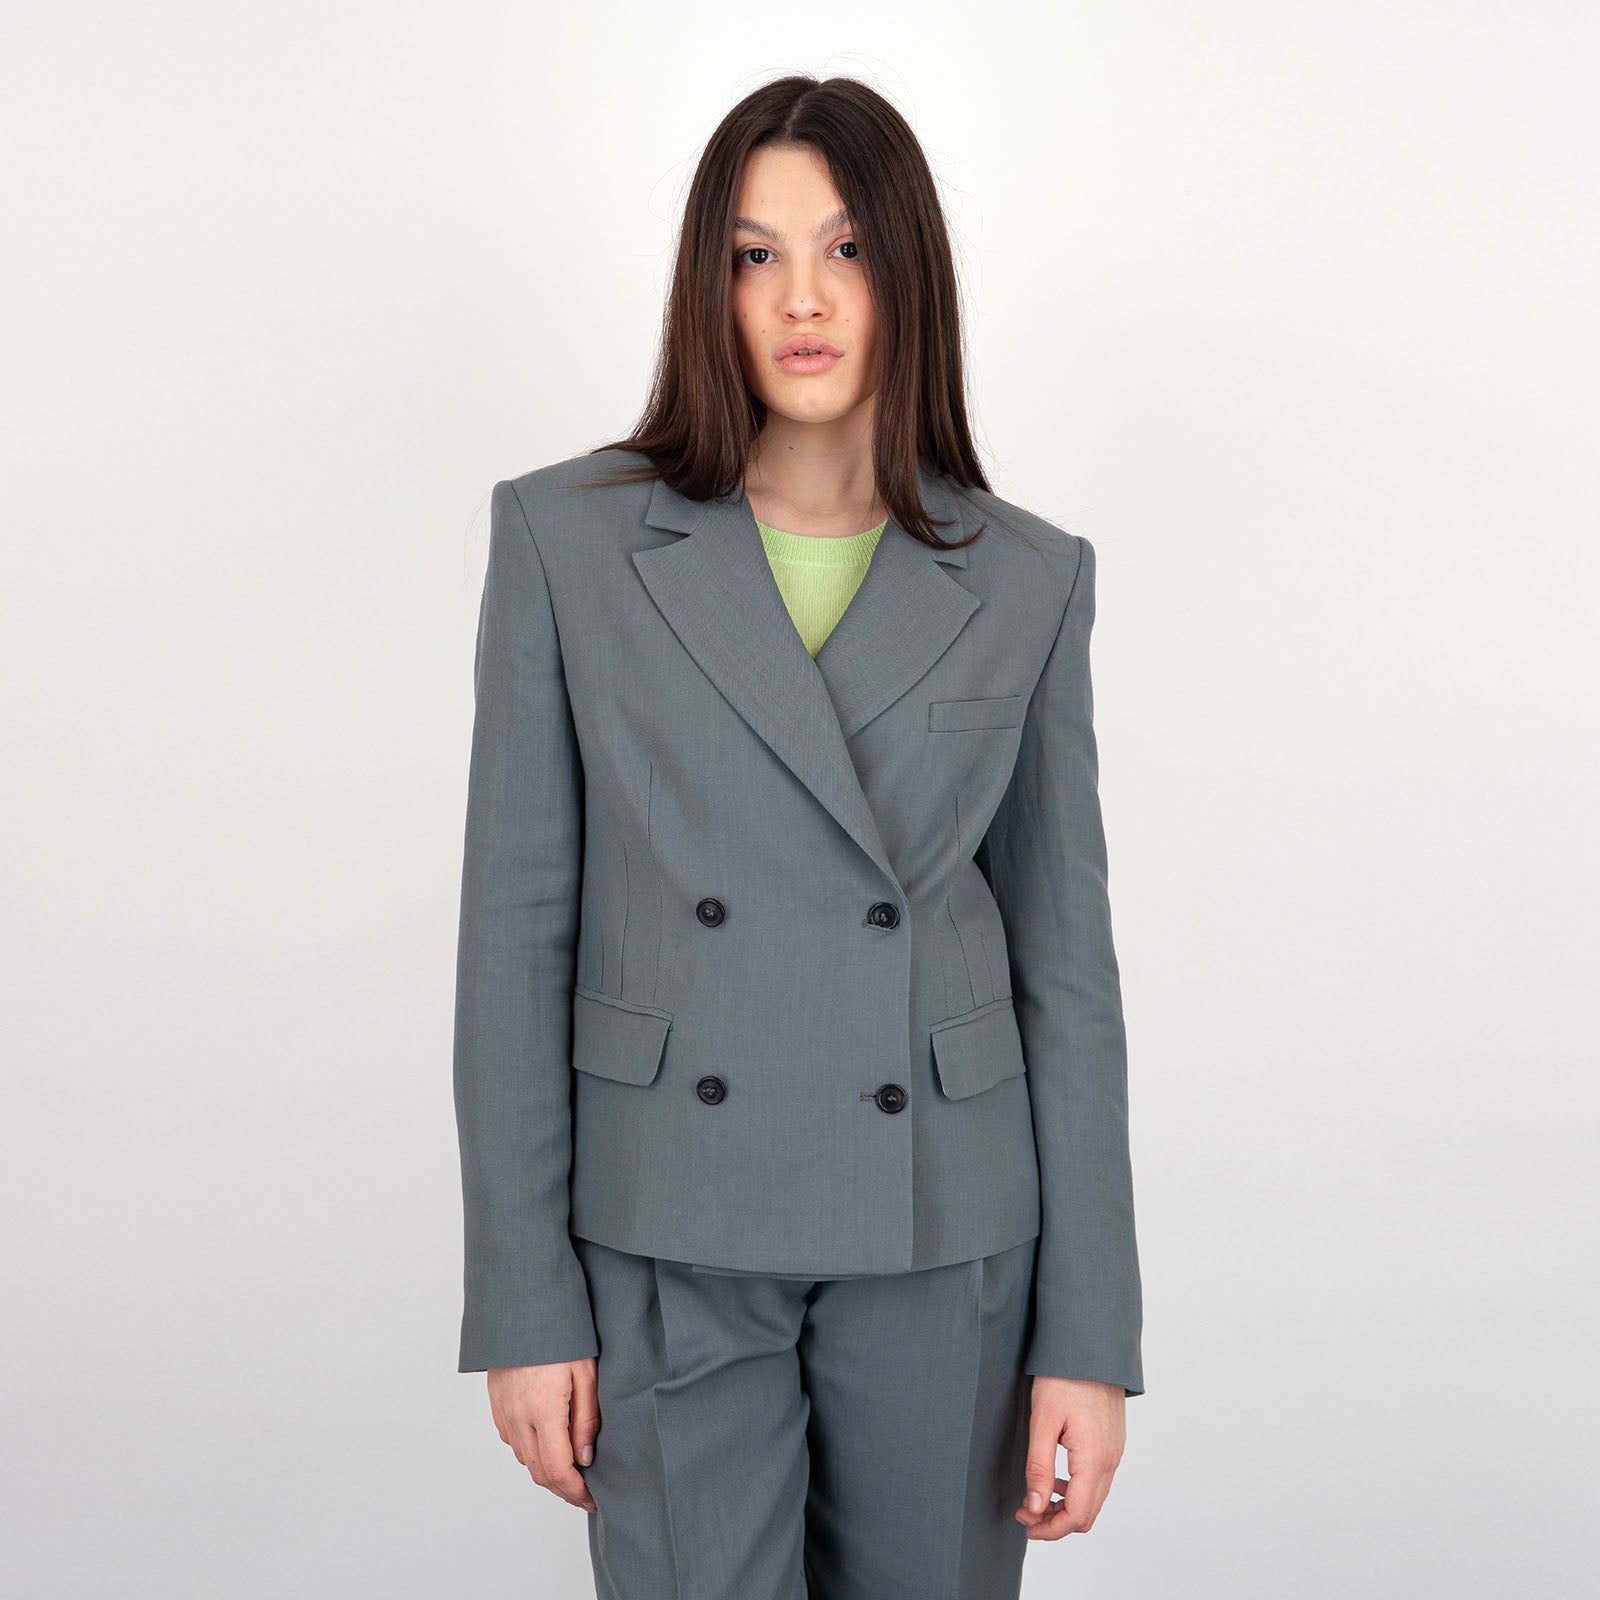 Grifoni Double-Breasted Linen Grey Jacket - 8